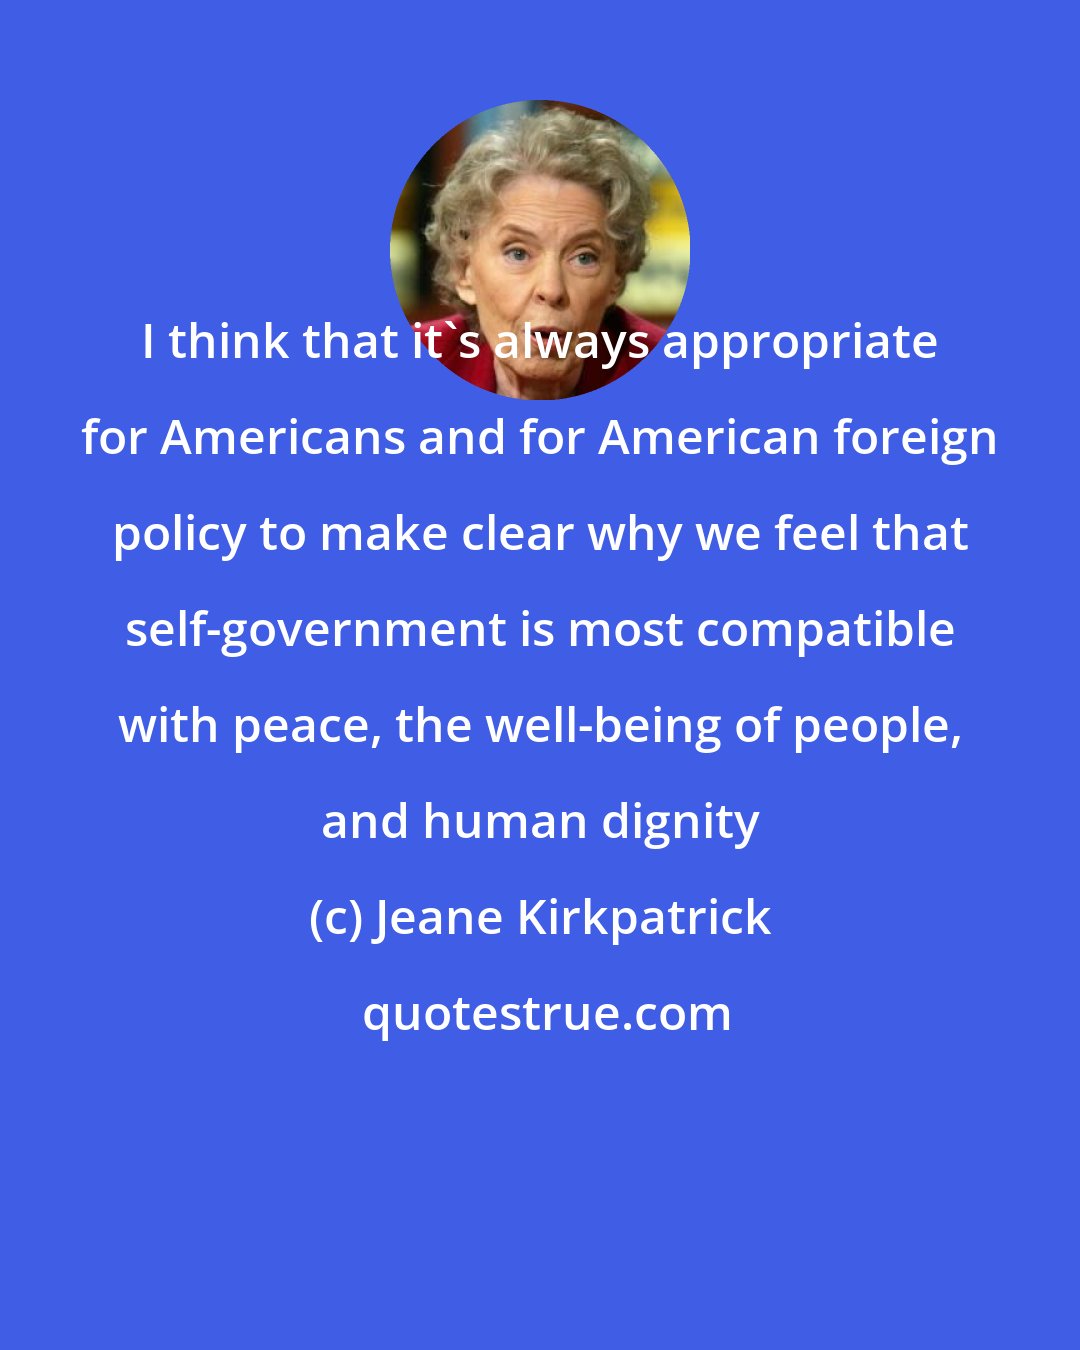 Jeane Kirkpatrick: I think that it's always appropriate for Americans and for American foreign policy to make clear why we feel that self-government is most compatible with peace, the well-being of people, and human dignity